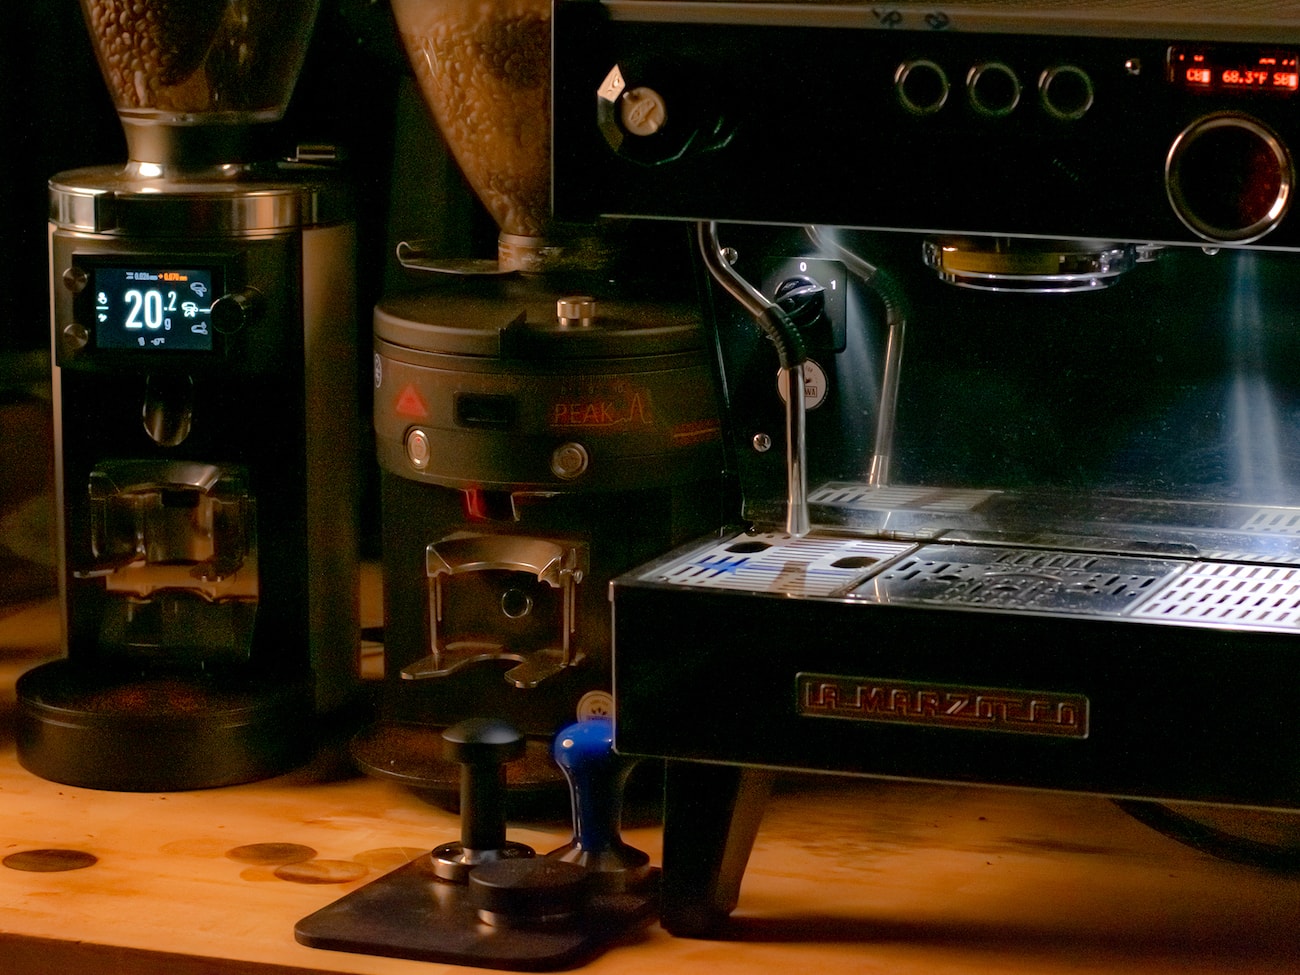 Espresso machine next to tampers and grinders